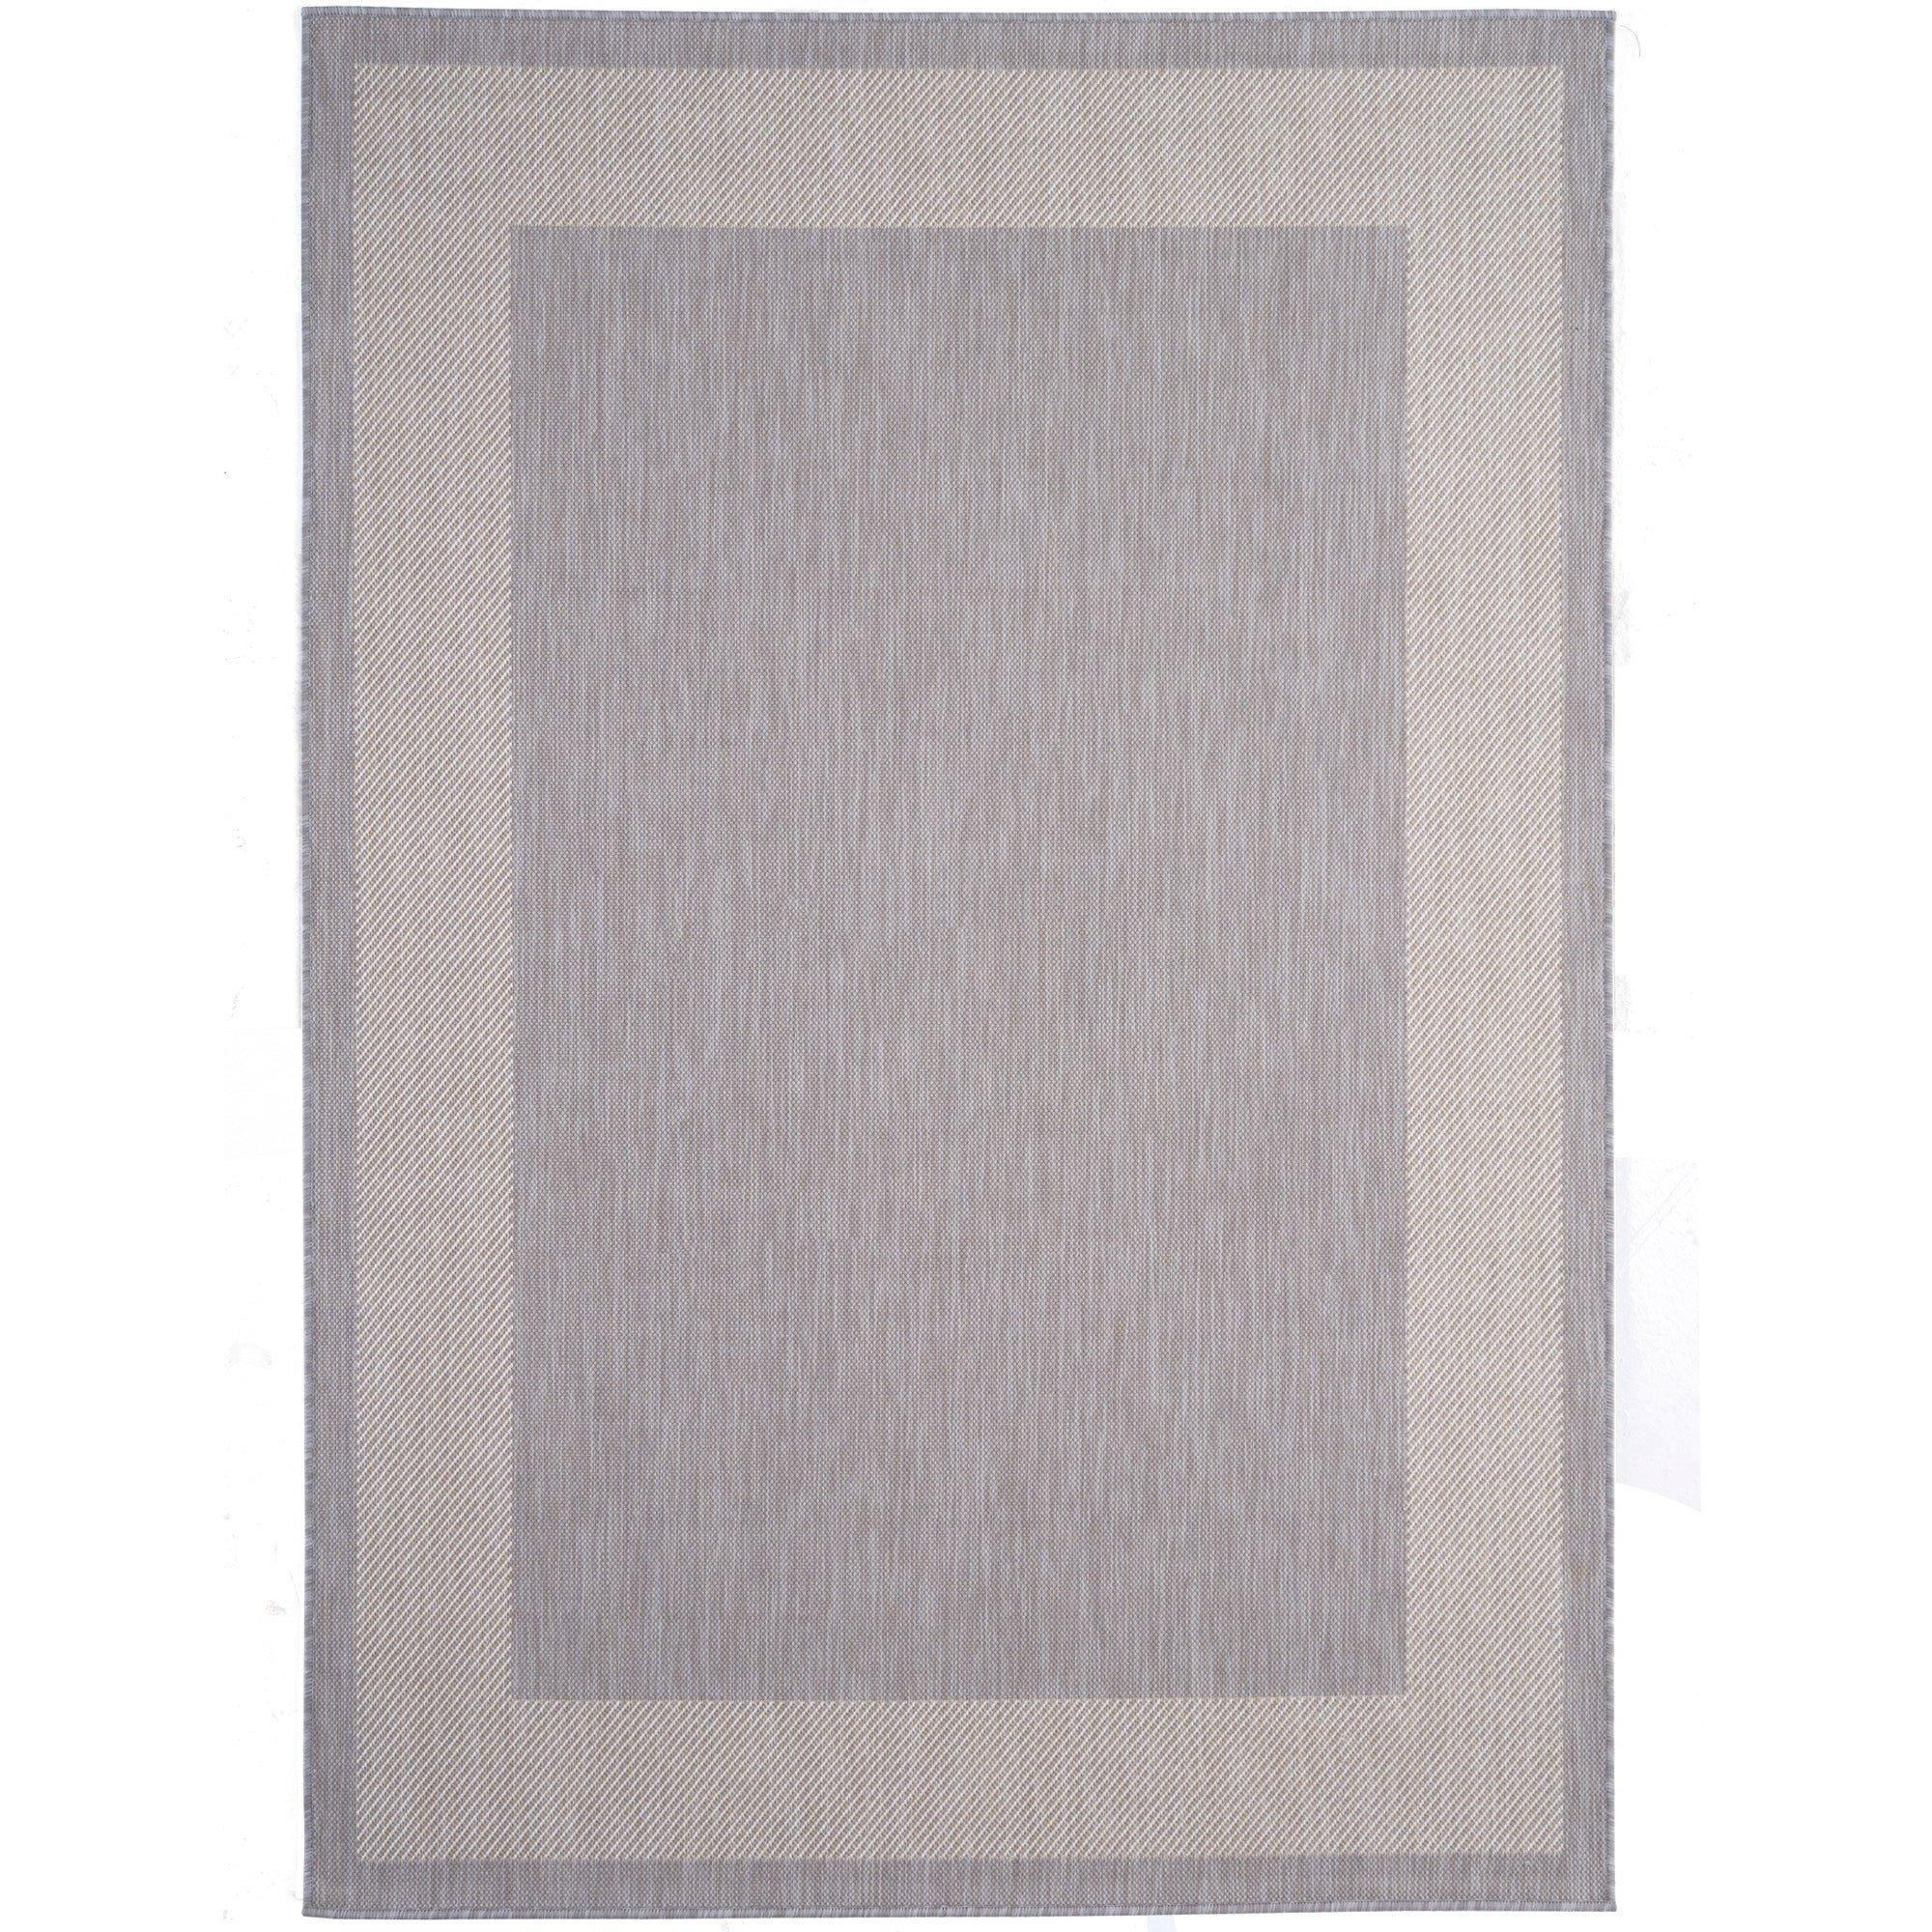 Ecology Collection Outdoor Rugs in Grey - 200g - image 1